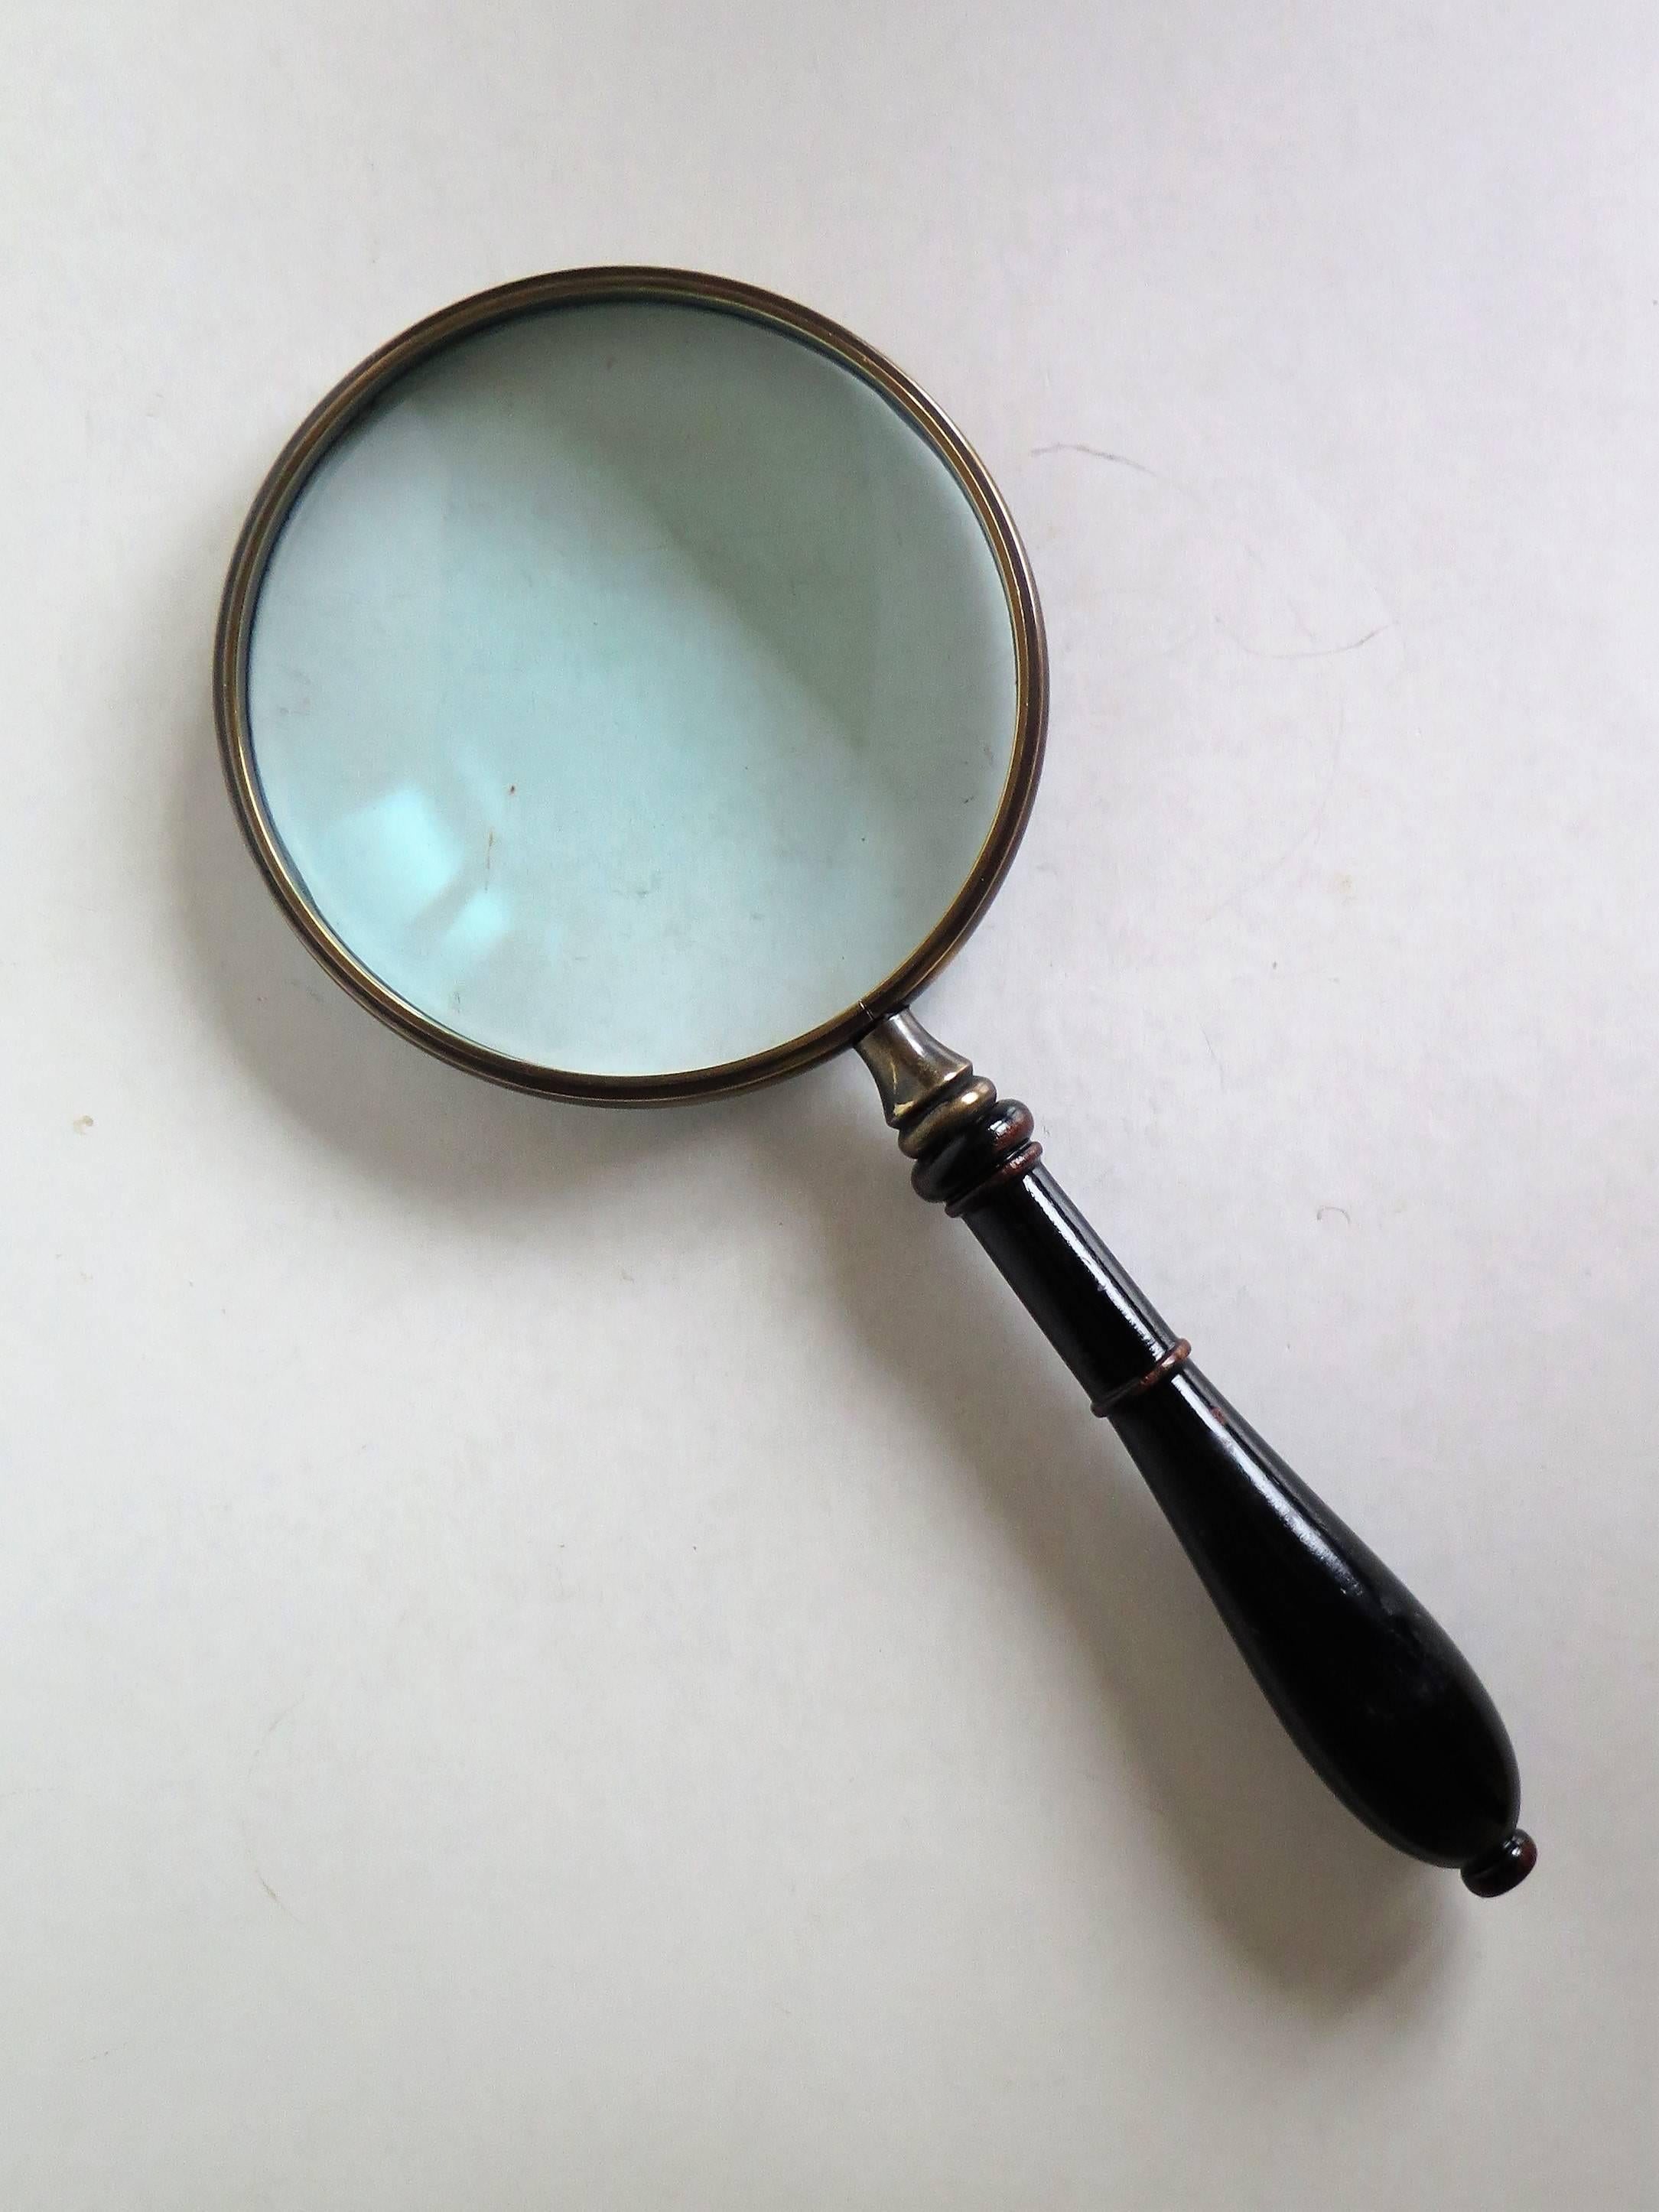 British 19th Century Victorian Large Magnifying Glass Hand Turned Handle, Circa 1860